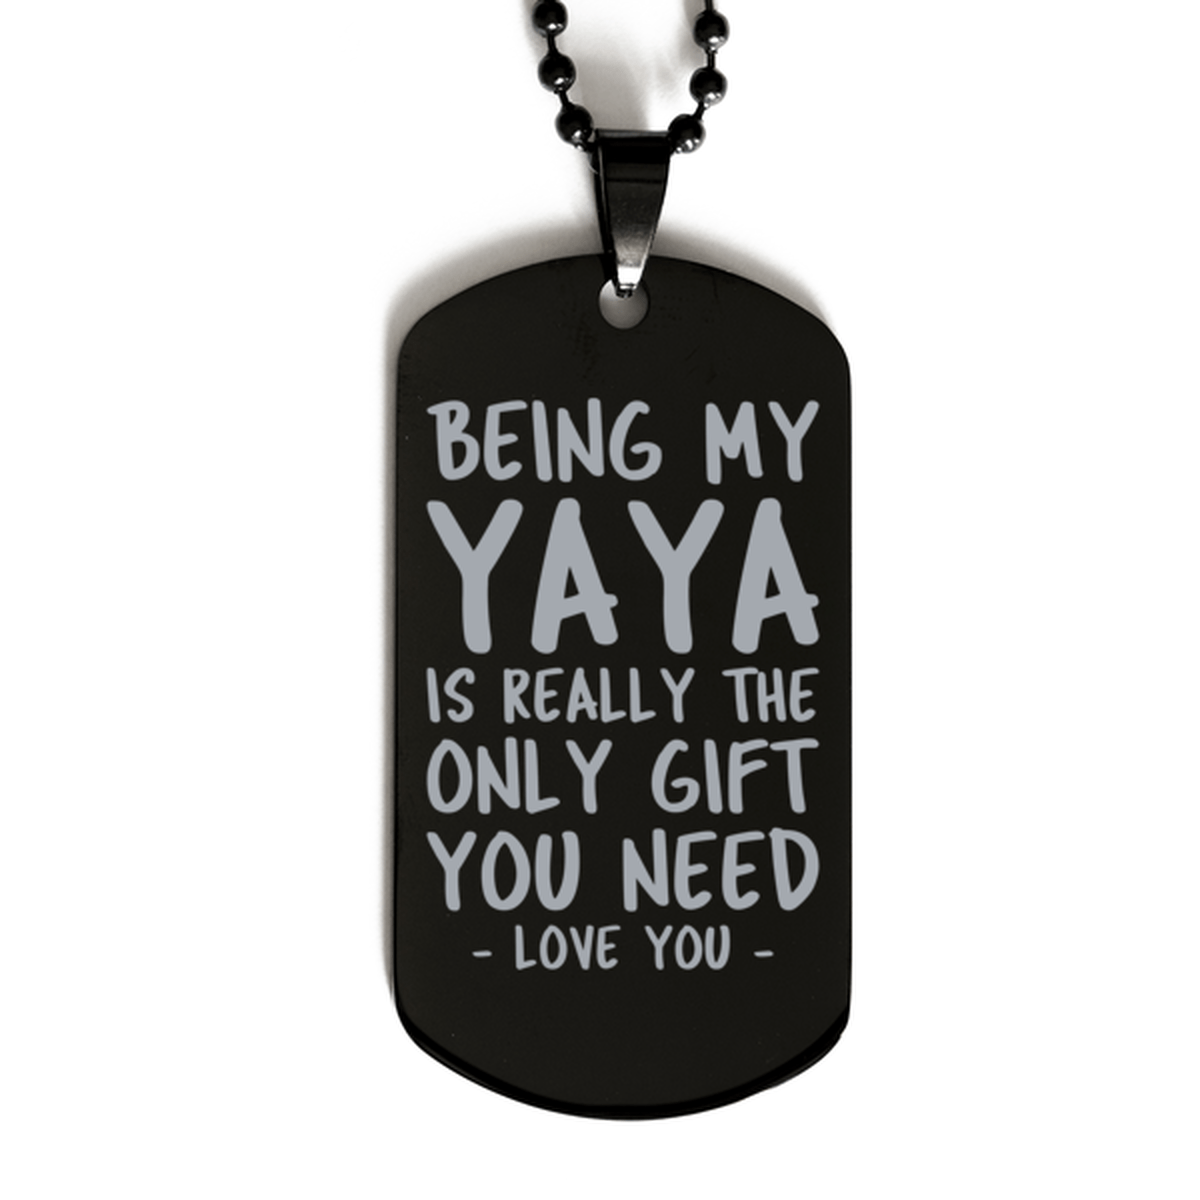 Funny Yaya Black Dog Tag Necklace, Being My Yaya Is Really the Only Gift You Need, Best Birthday Gifts for Yaya